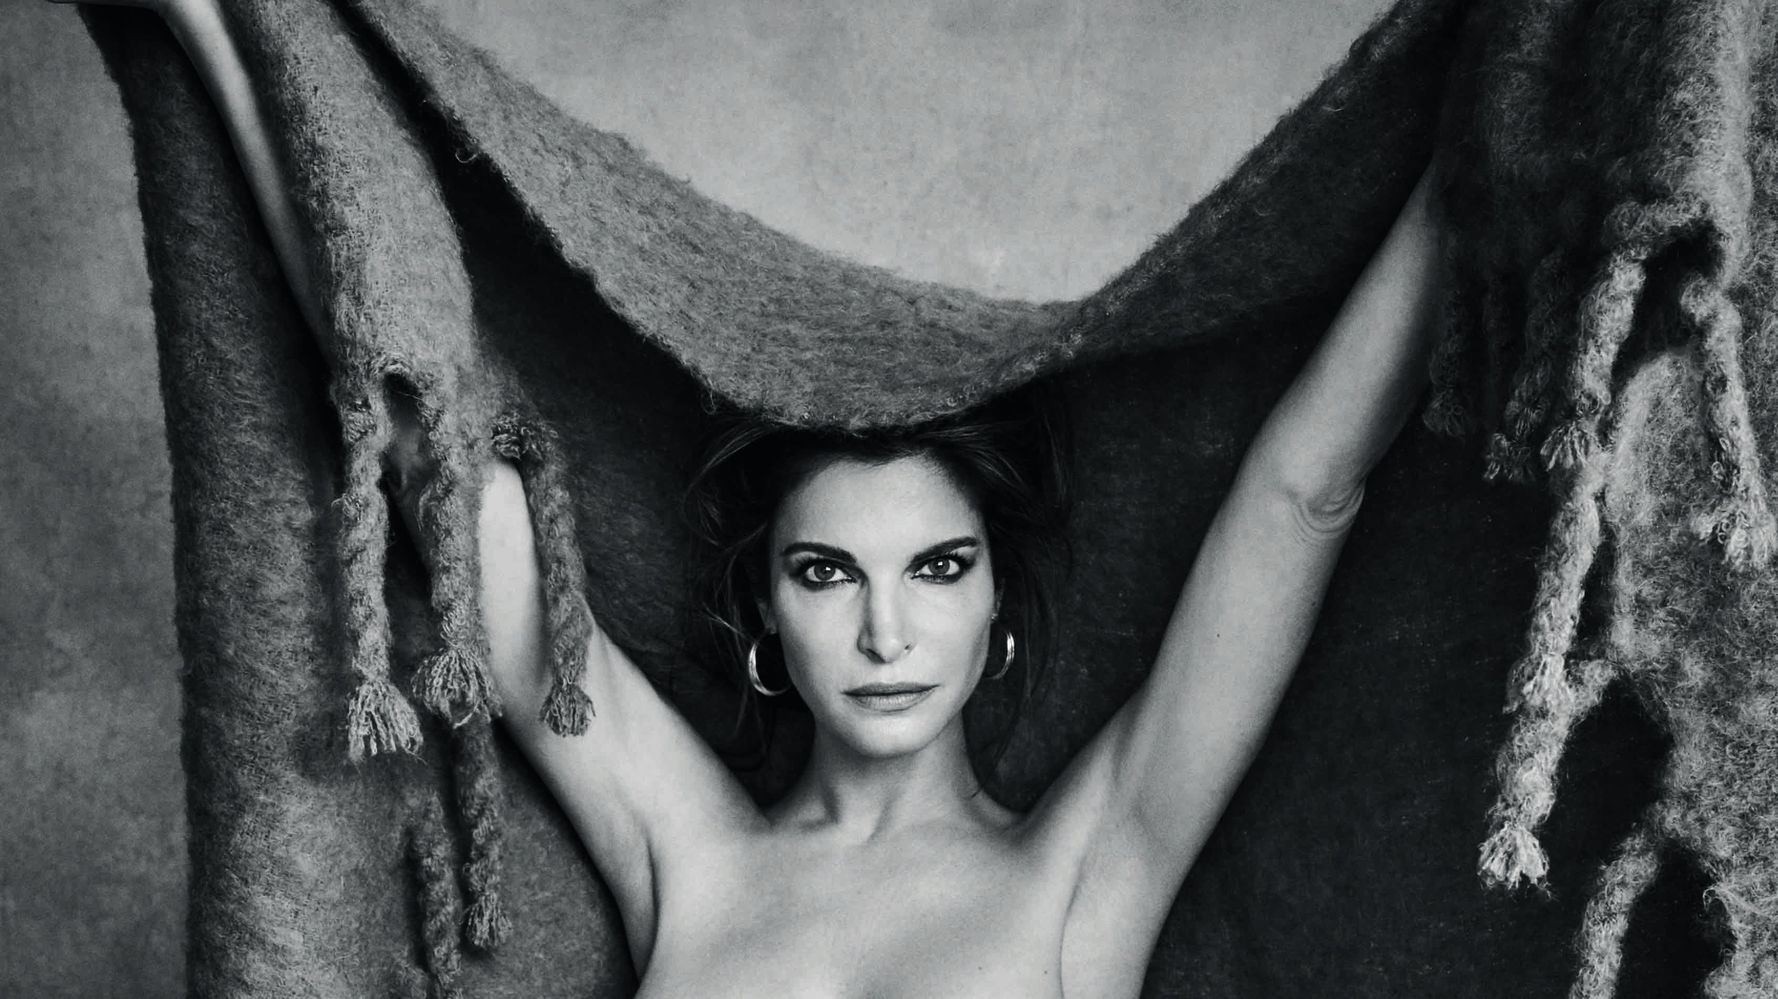 Stephanie Seymour Poses Topless For A Super Sexy Magazine Shoot.